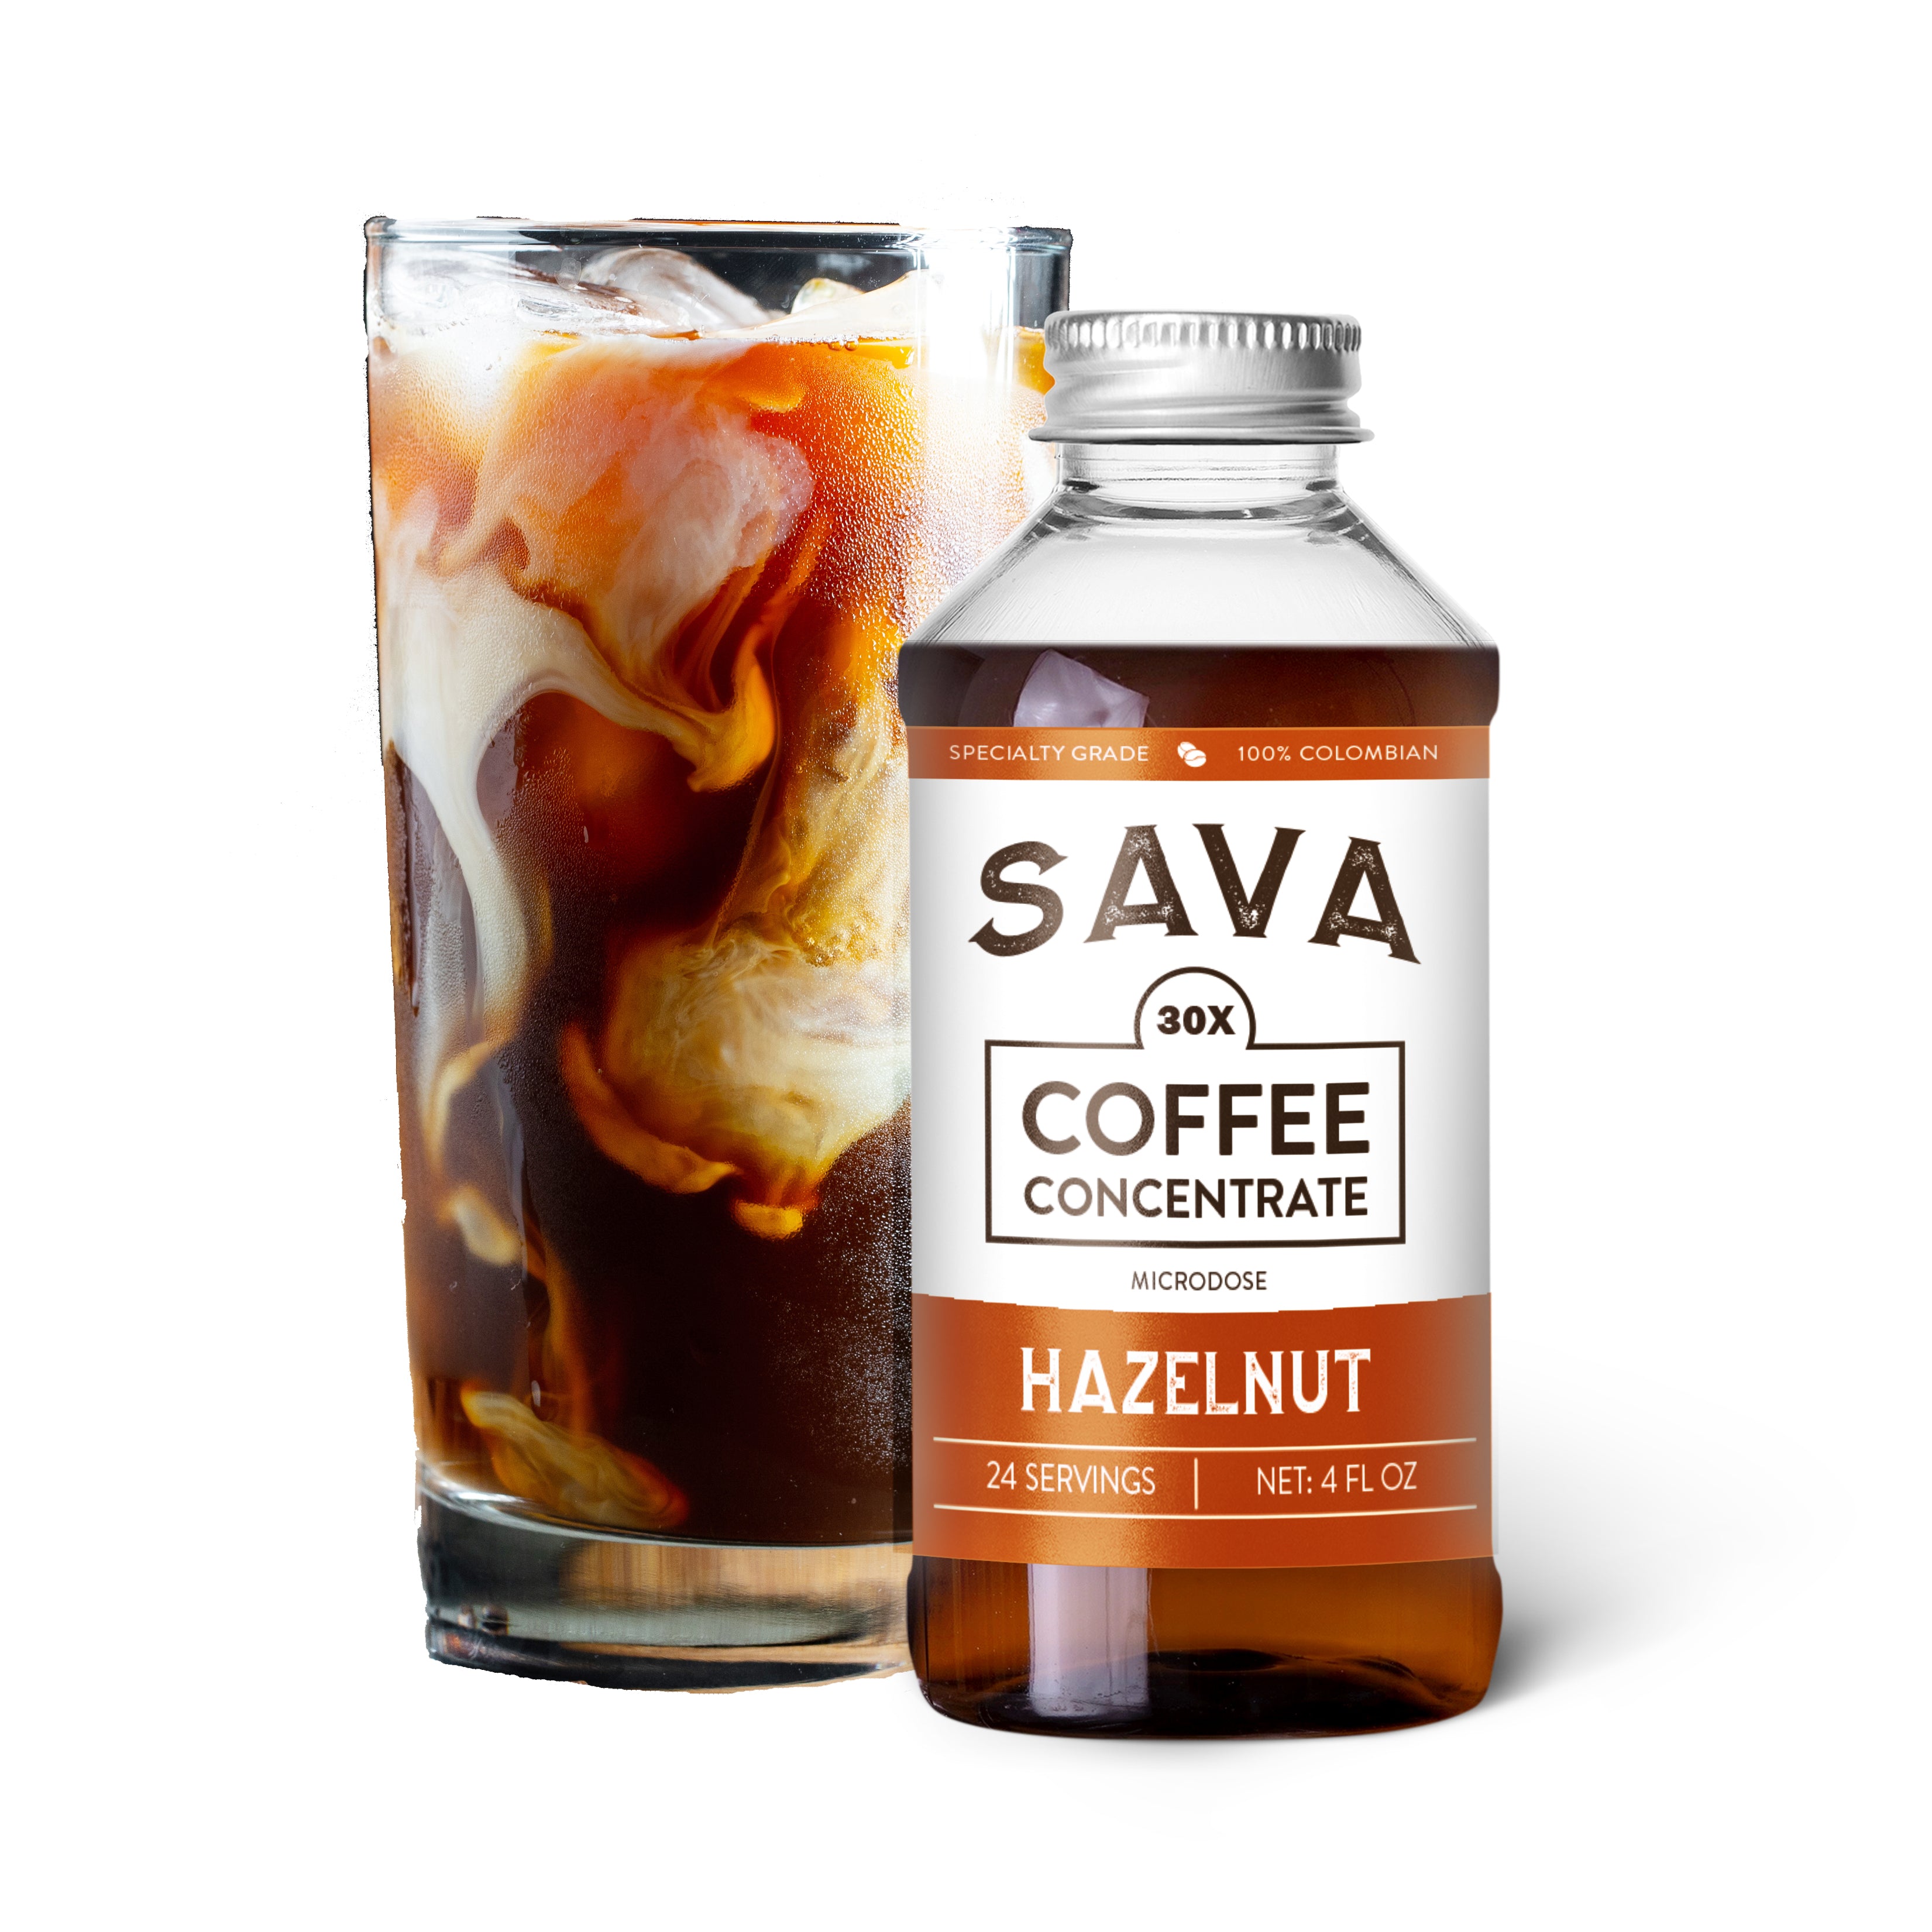 SAVA Cold Brew Coffee Concentrate 30X - Hazelnut 4 ounce volume